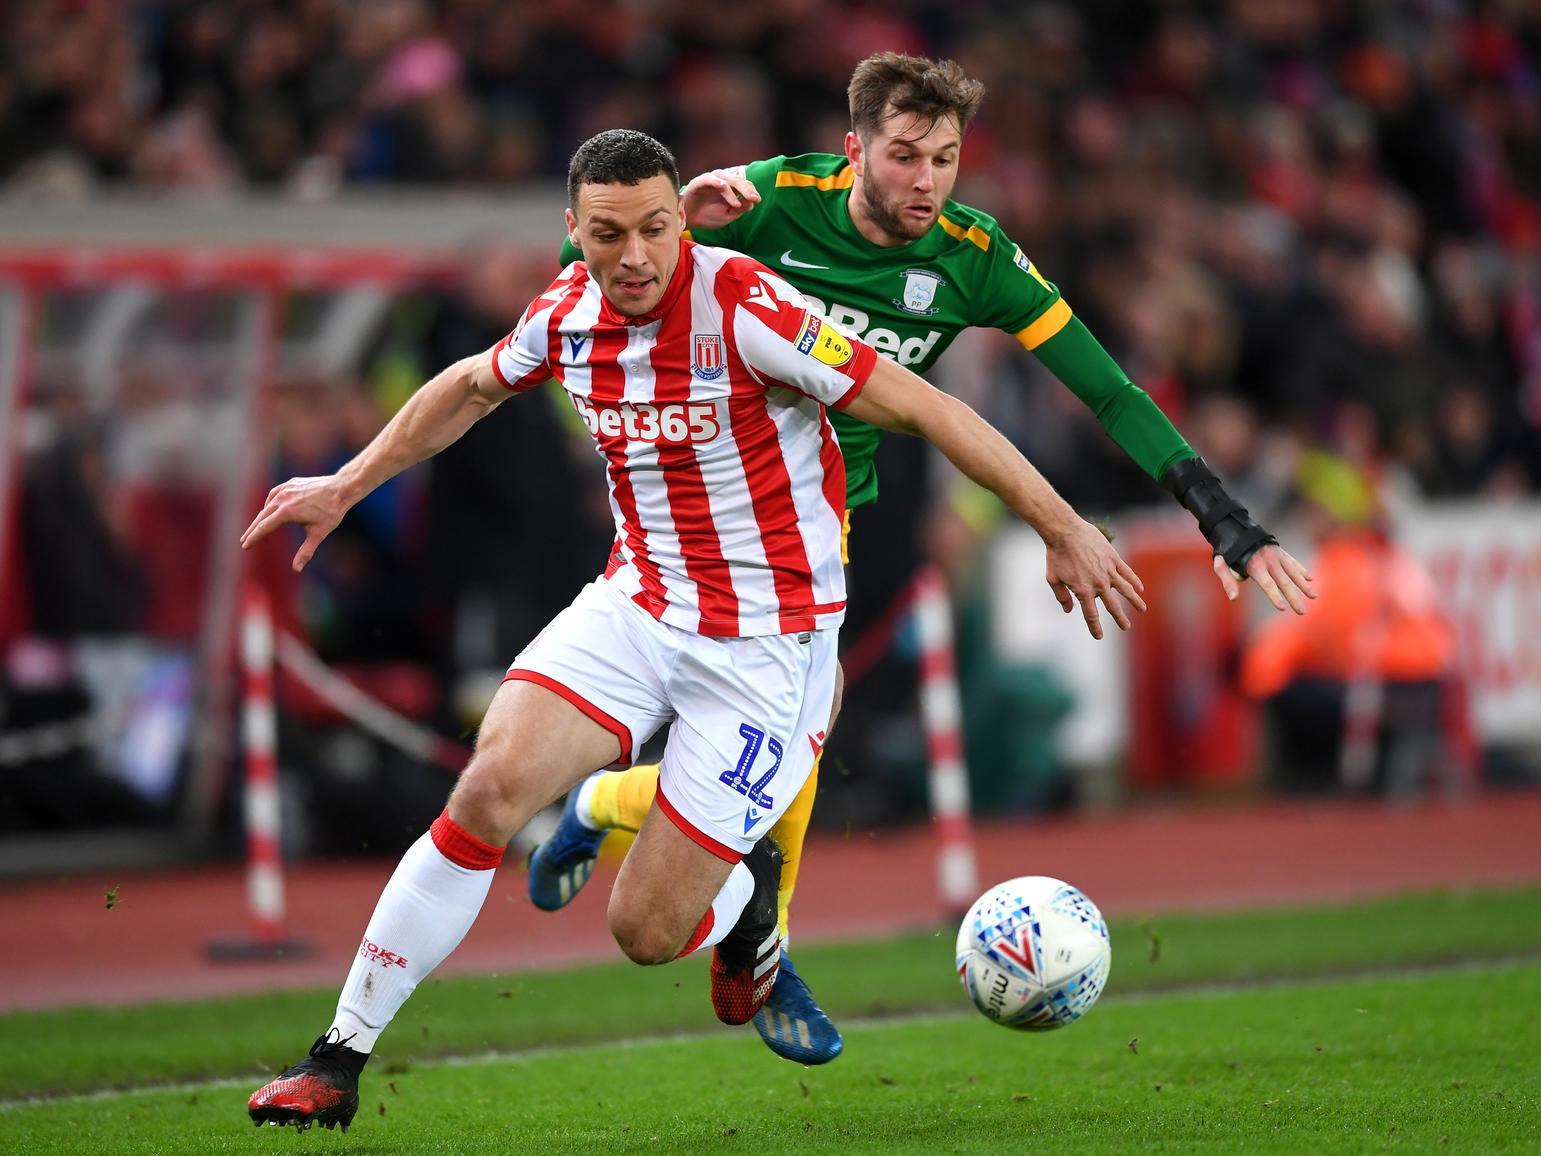 Stoke City loan star James Chester is set to be released by Aston Villa in the summer, which could see the Potters sign the ex-Hull City man on a permanent deal. (Stoke Sentinel)